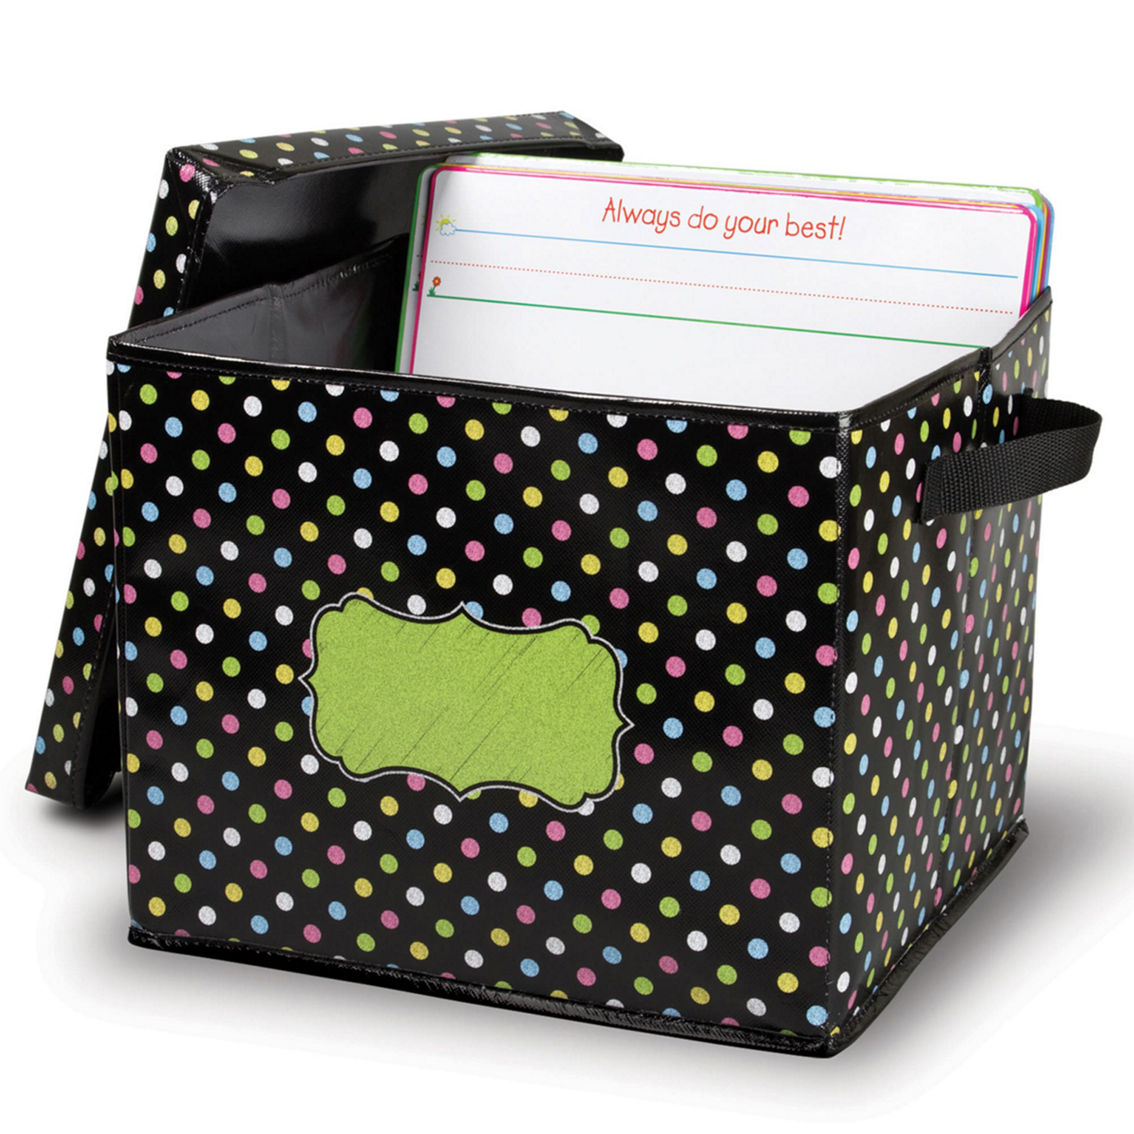 Teacher Created Resources® Chalkboard Brights Storage Box with Lid - Image 2 of 2